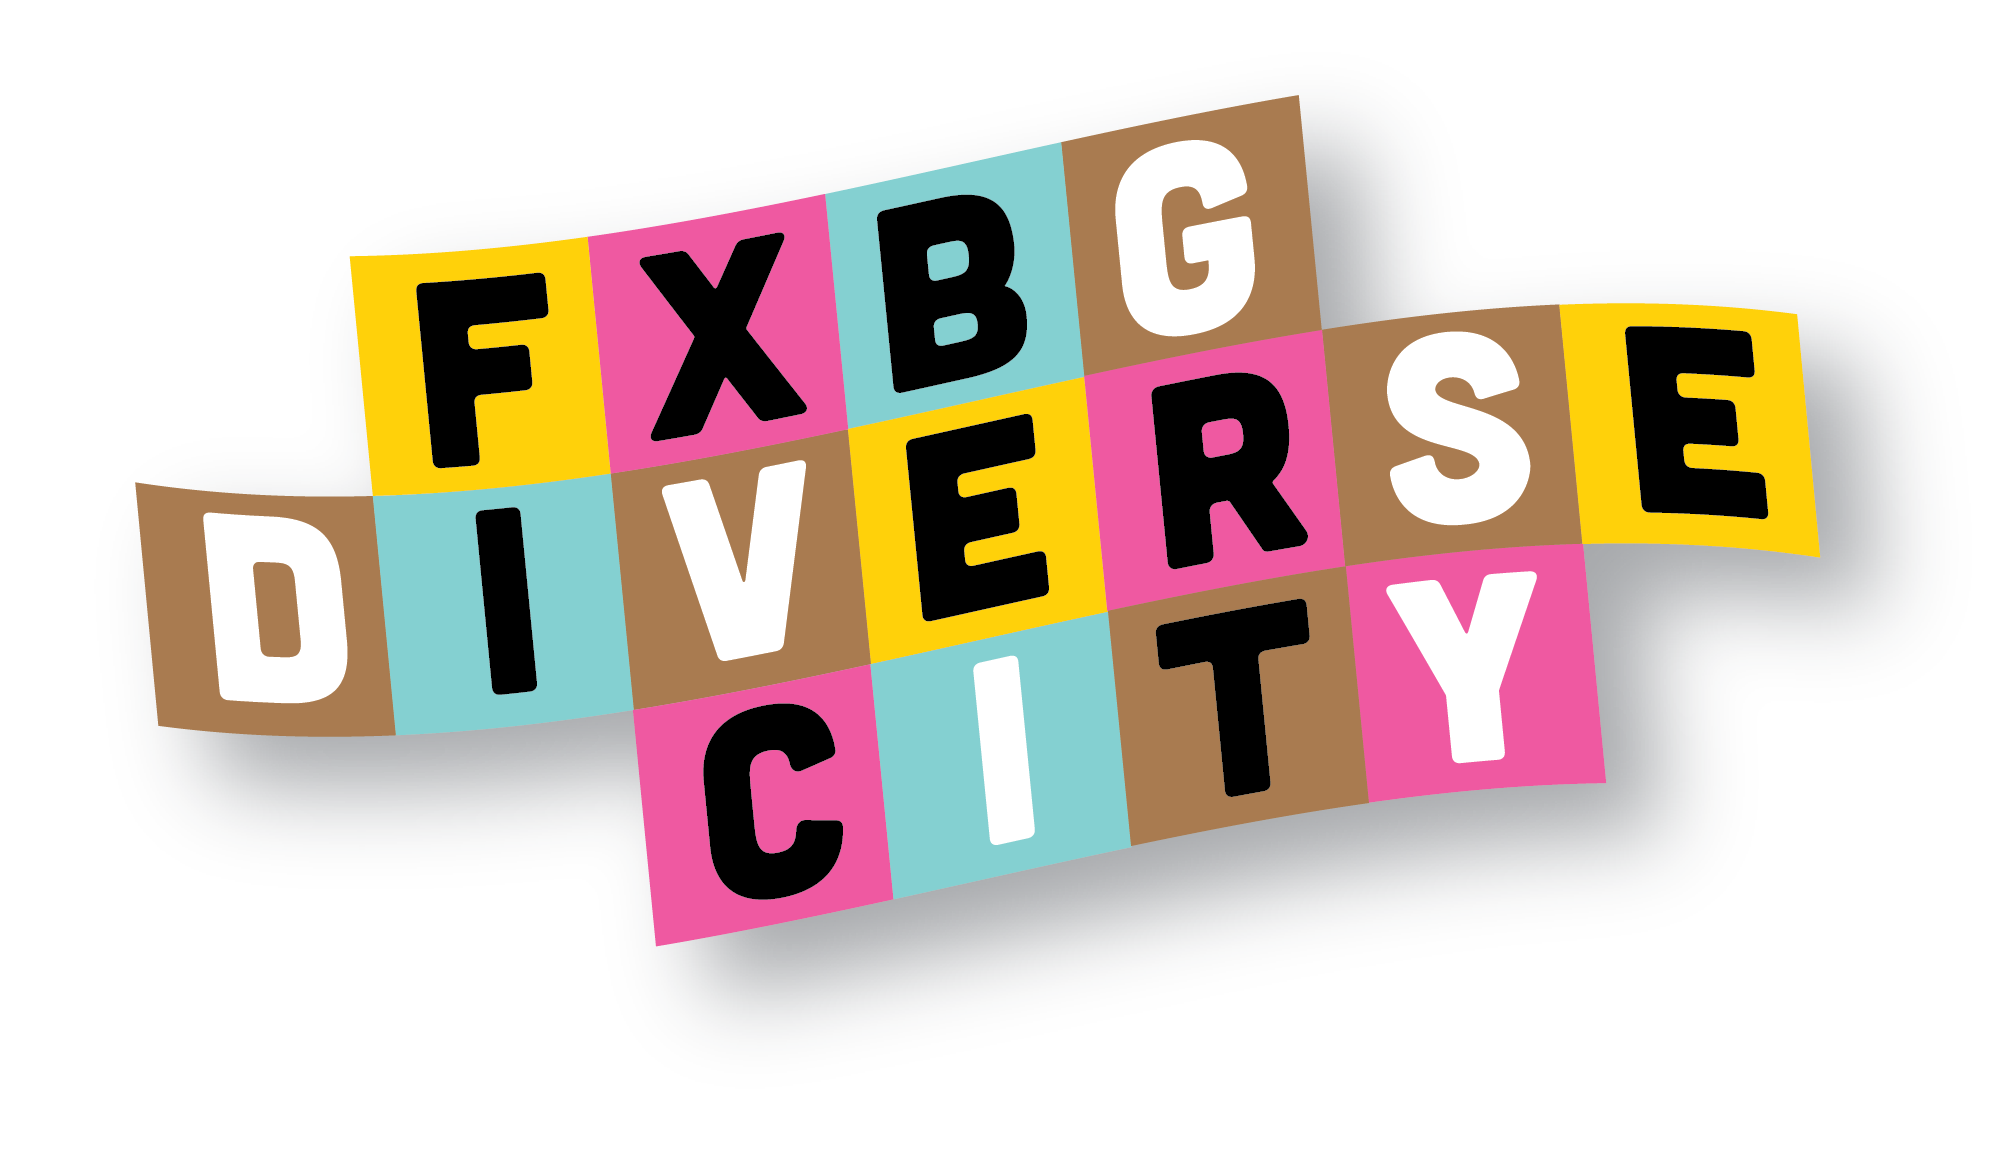 ‘FXBG Diverse City’ campaign launches this week